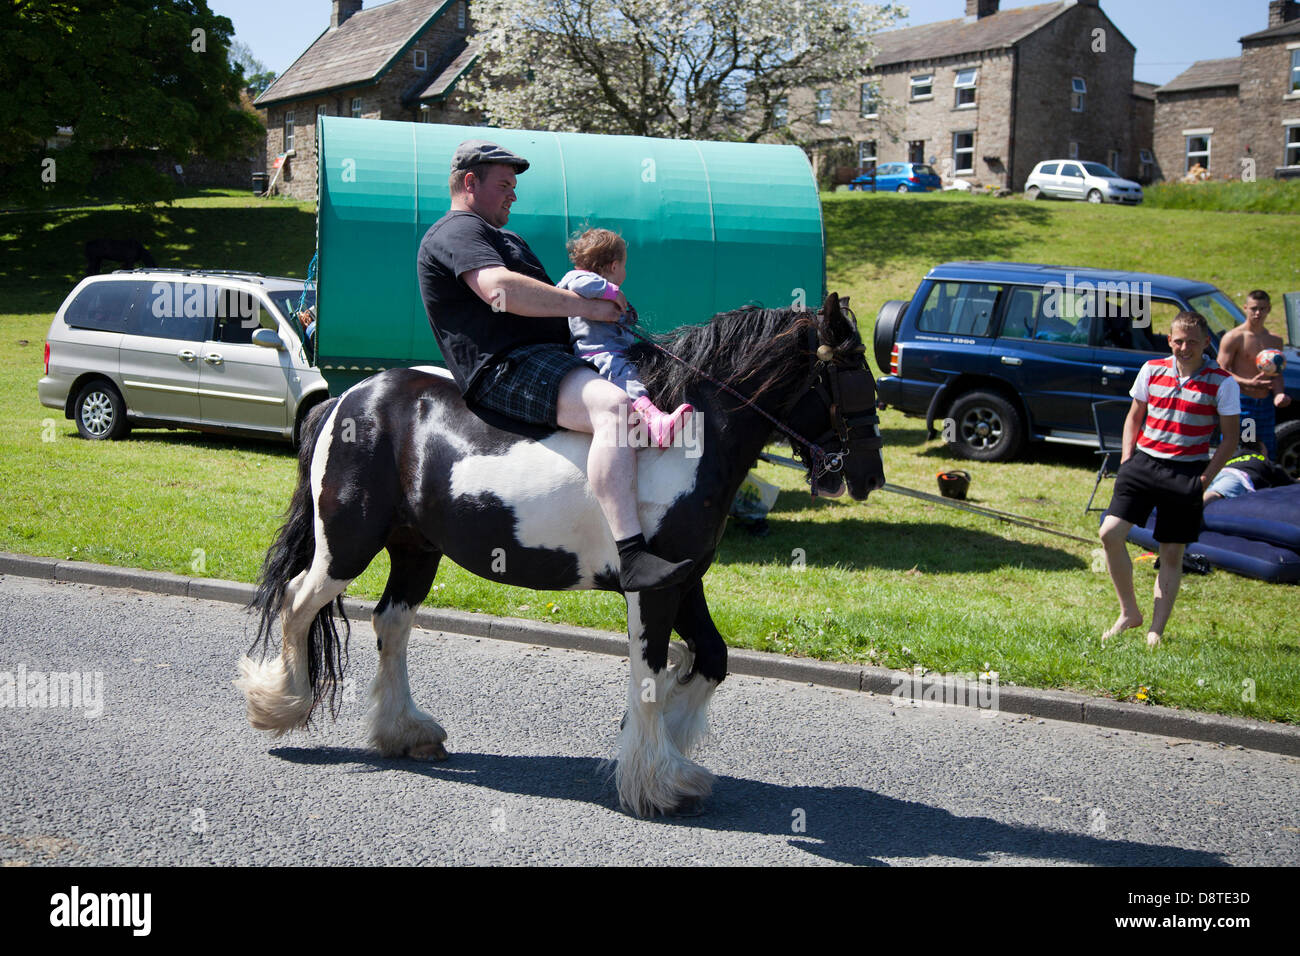 Gypsy travellers in Bainbridge, Richmondshire, North Yorkshire, UK June, 2013. Father and cvhild on horseback as members of the travelling community travel en-route to the Appleby Horse Fair in Cumbria.  The Fair is an annual gathering of Gypsies and Travellers which takes place on the first week in June, and has taken place since the reign of James II, who granted a Royal charter in 1685 allowing a horse fair 'near to the River Eden'. Stock Photo